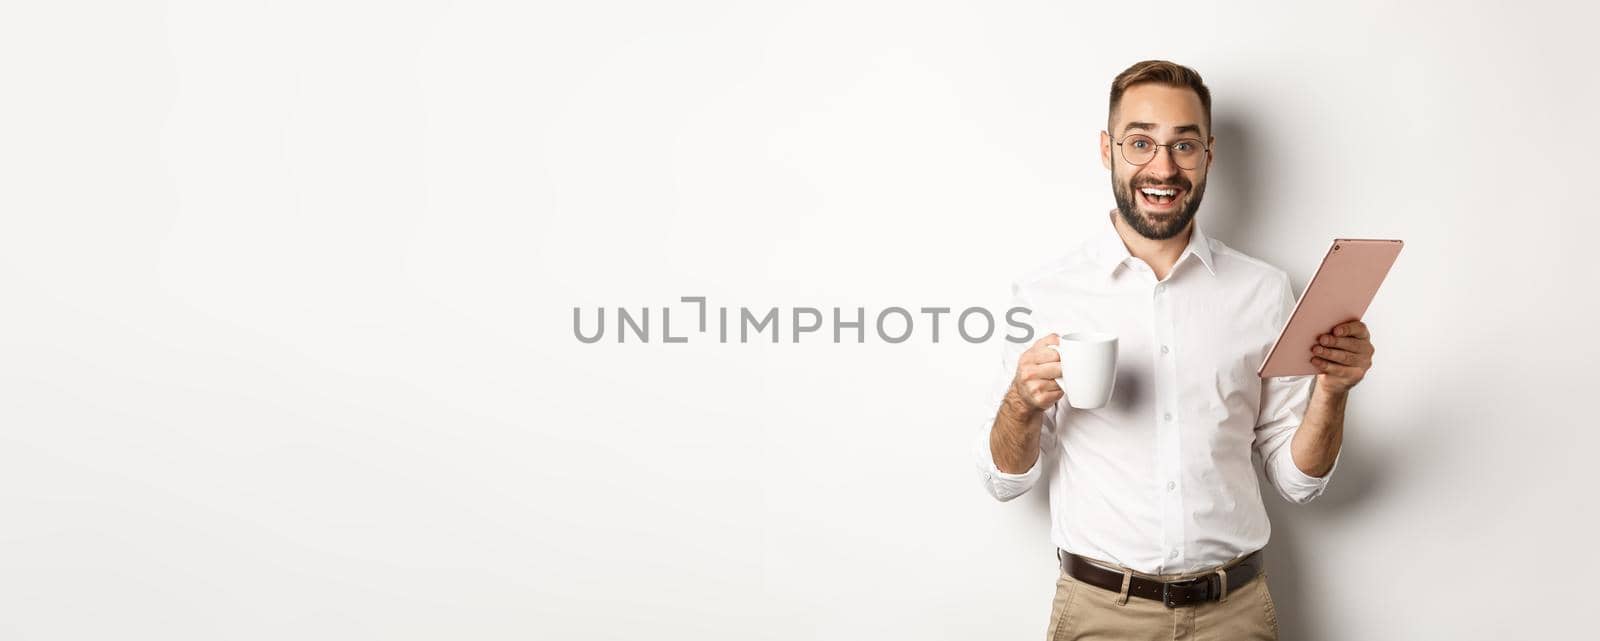 Excited manager reading on digital tablet, working and drinking coffee, standing against white background.